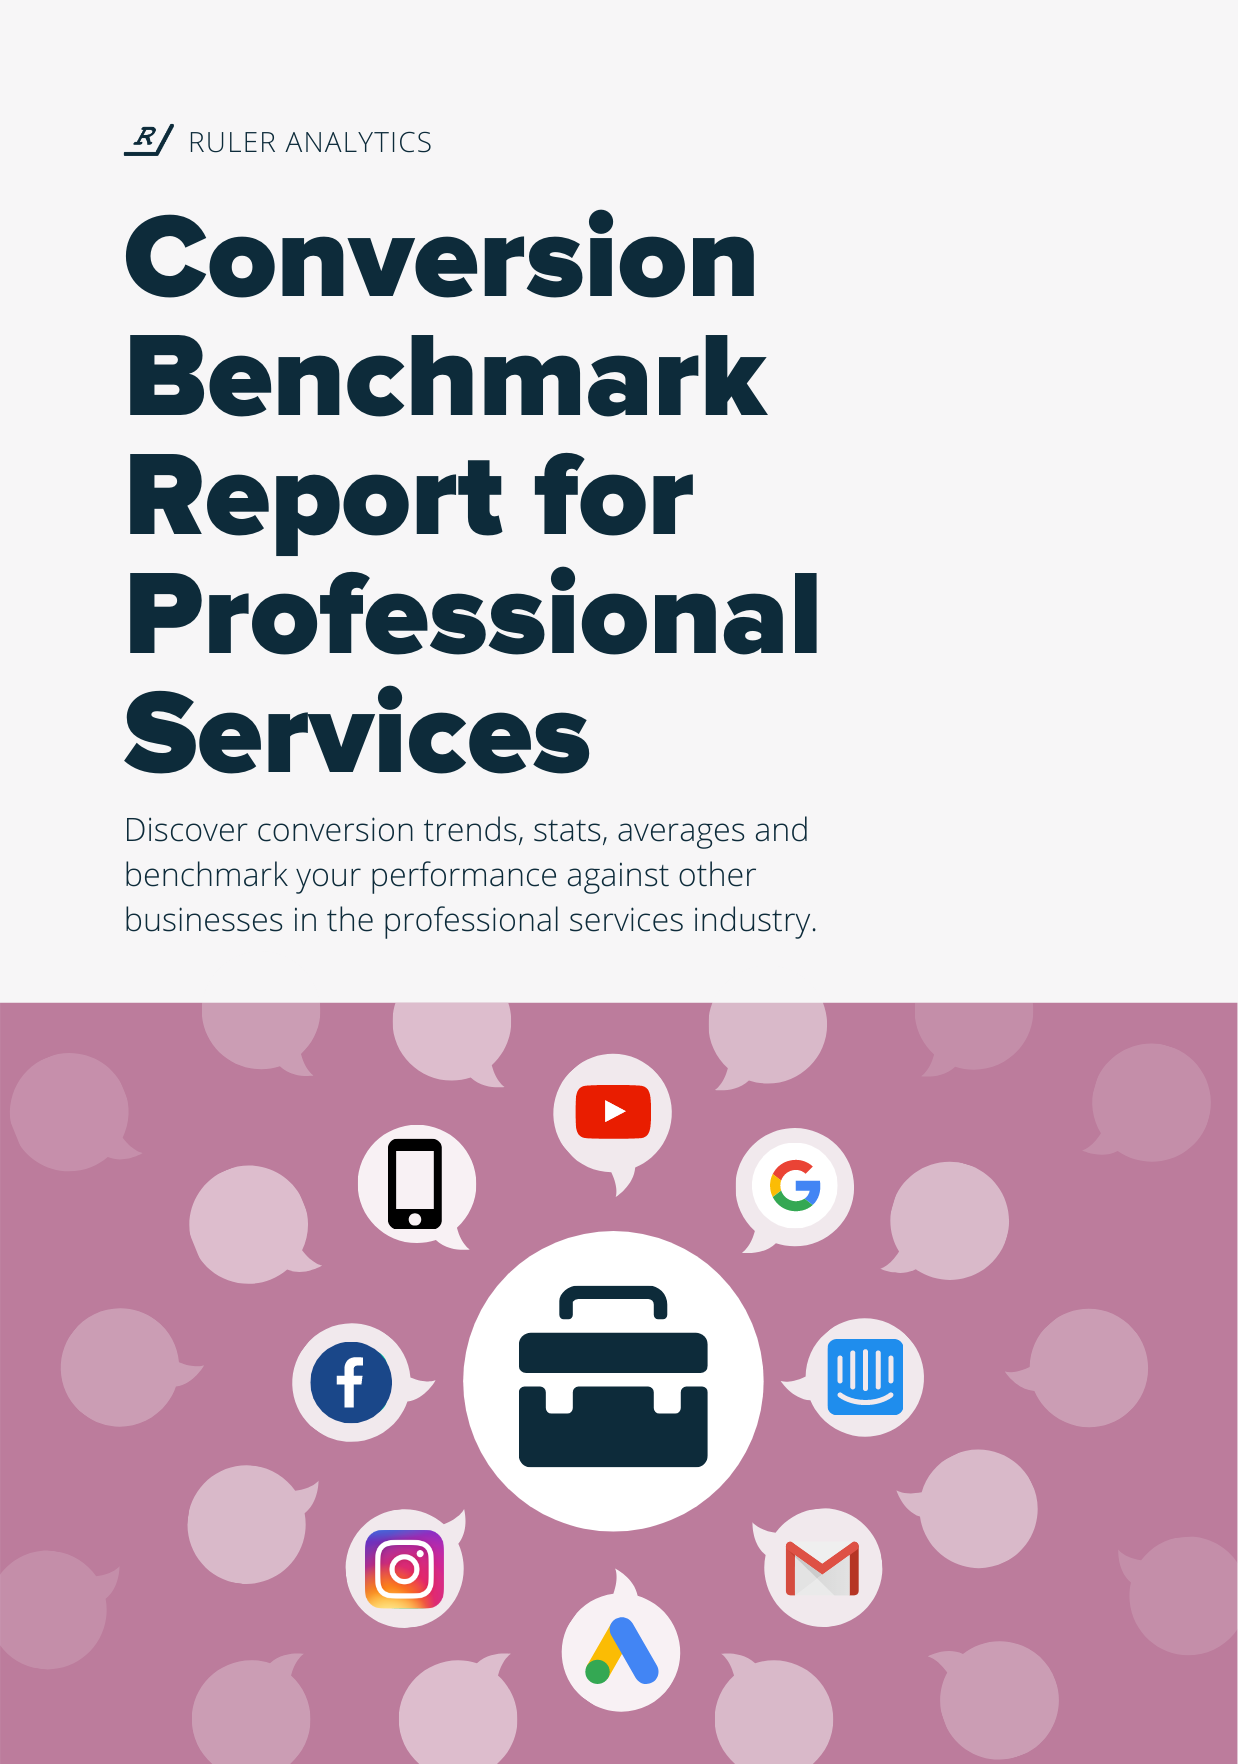 Conversion Benchmark Report for Professional Services